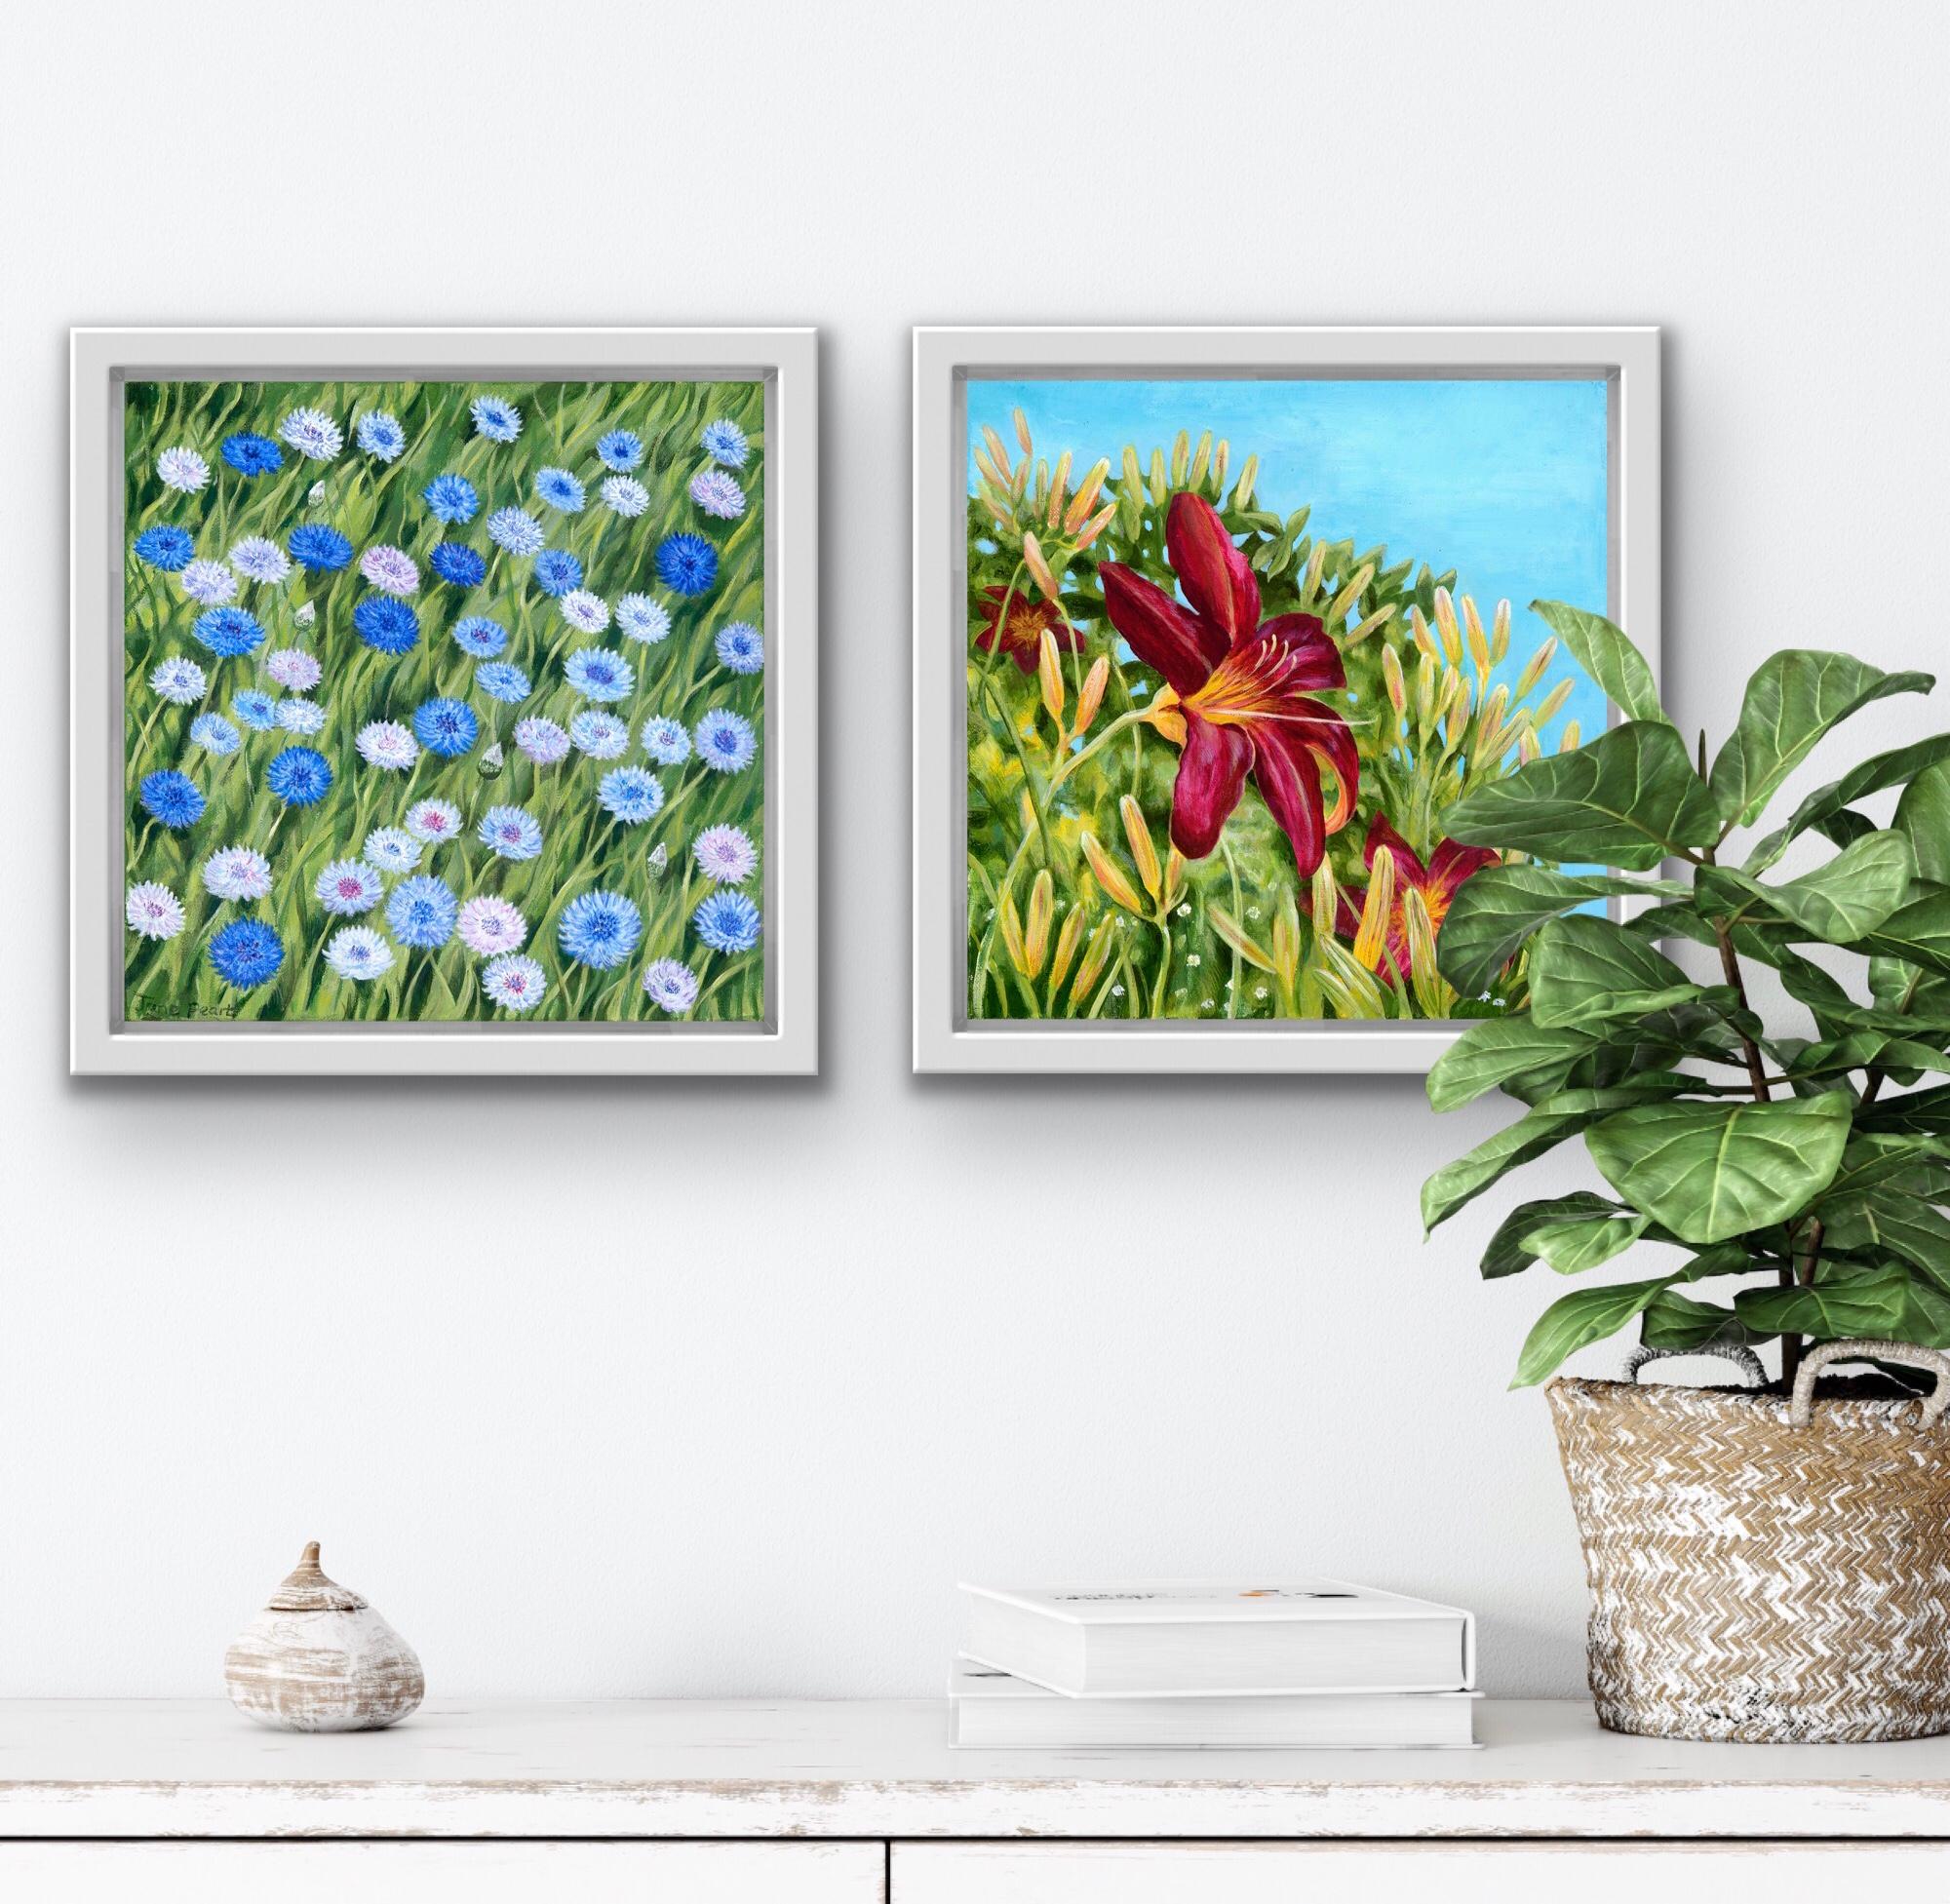 Cornflowers and Daylily diptych - Print by Jane Peart